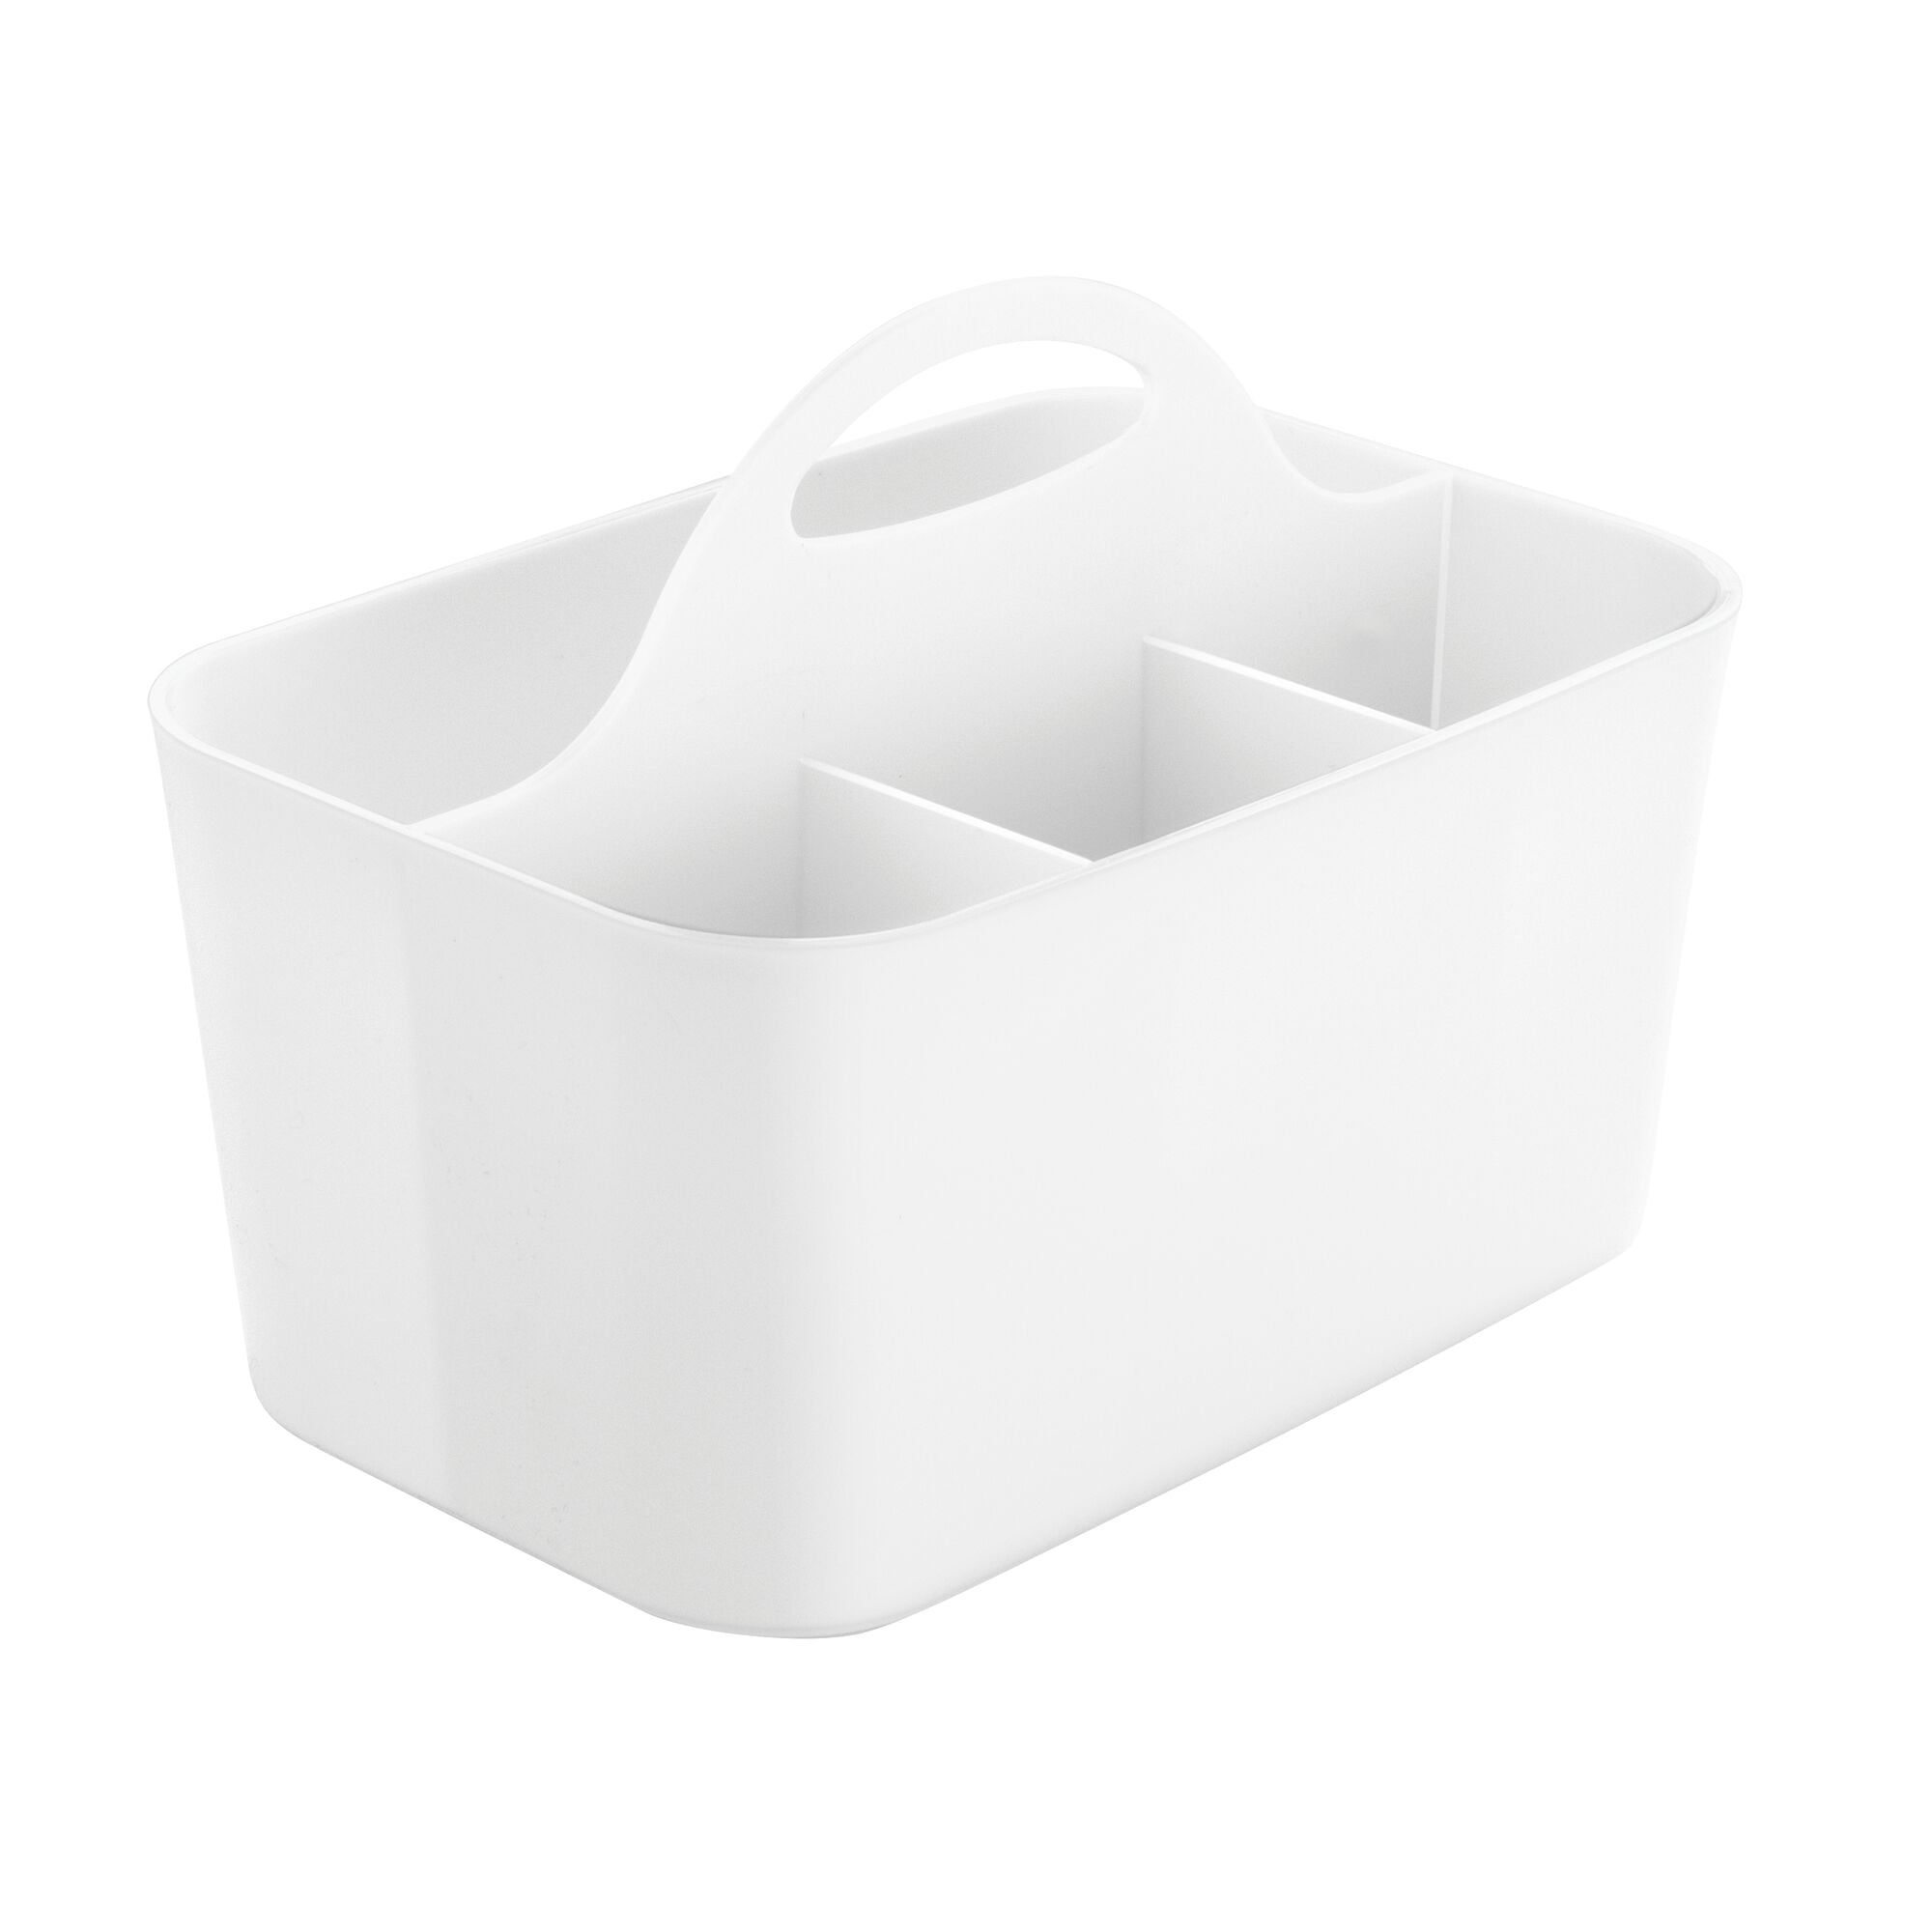 Mdesign Plastic Storage Caddy Tote For Desktop Office Supplies, Small :  Target